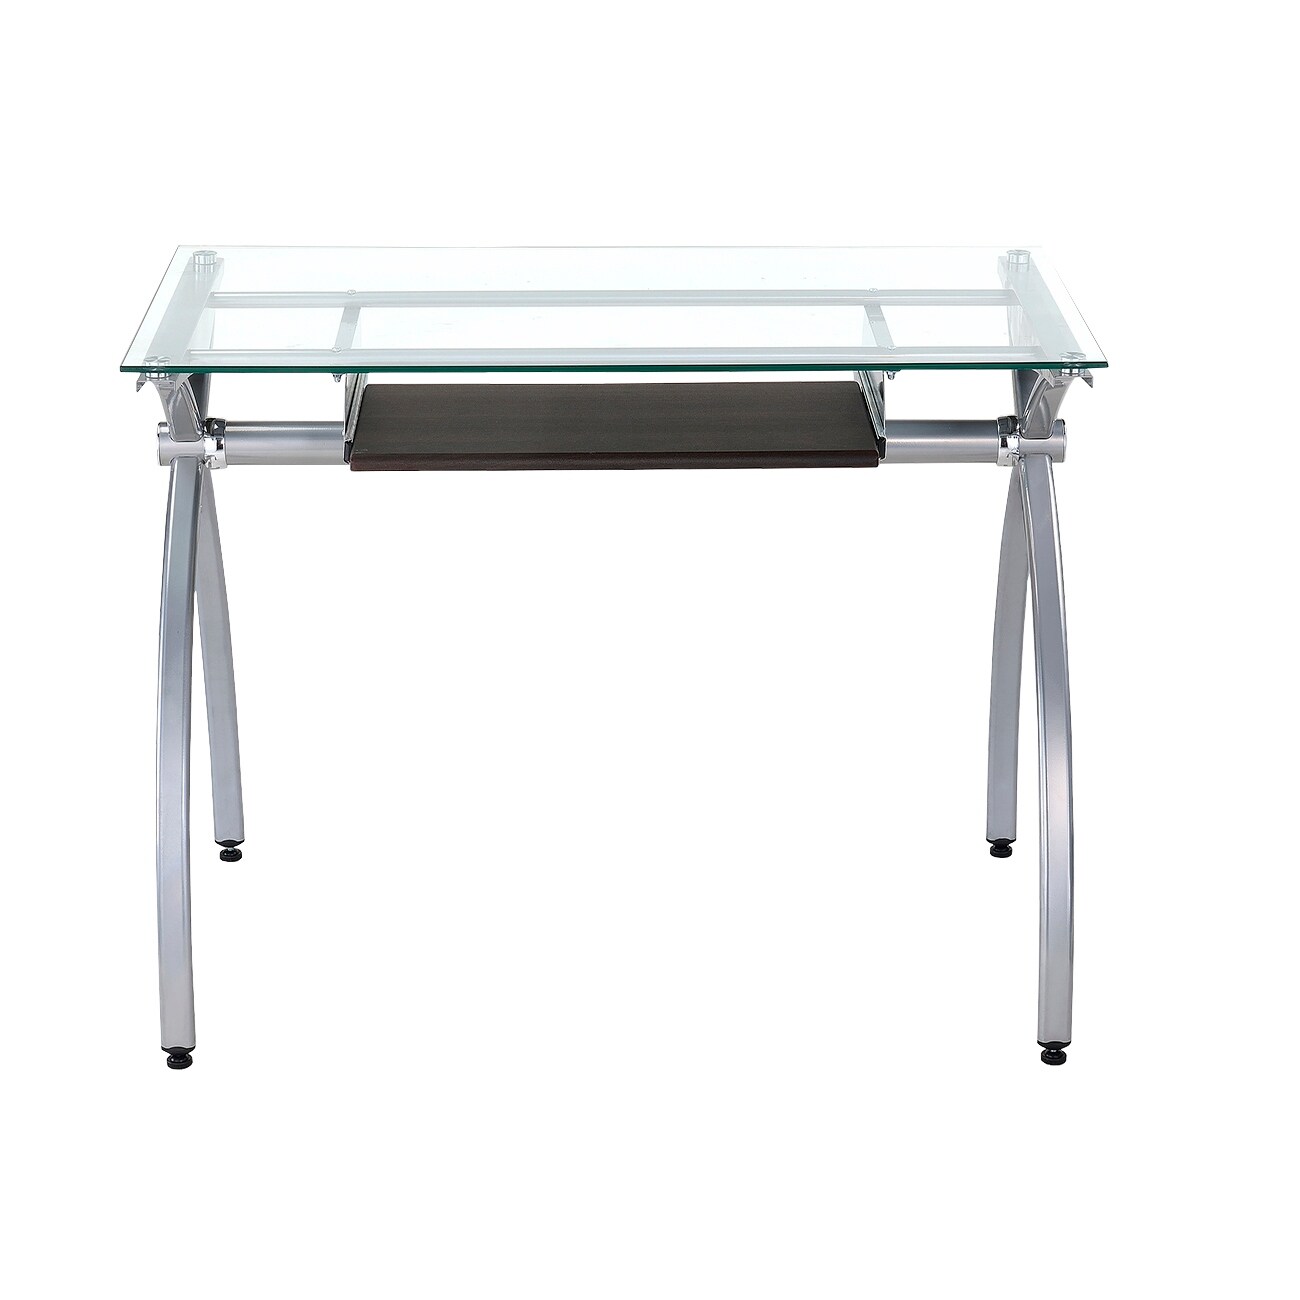 https://ak1.ostkcdn.com/images/products/is/images/direct/6f207a112c58e88d47ffac85dfd3ec25c1e08d02/Tempered-Glass-top-Steel-Frame-Computer-Desk.jpg